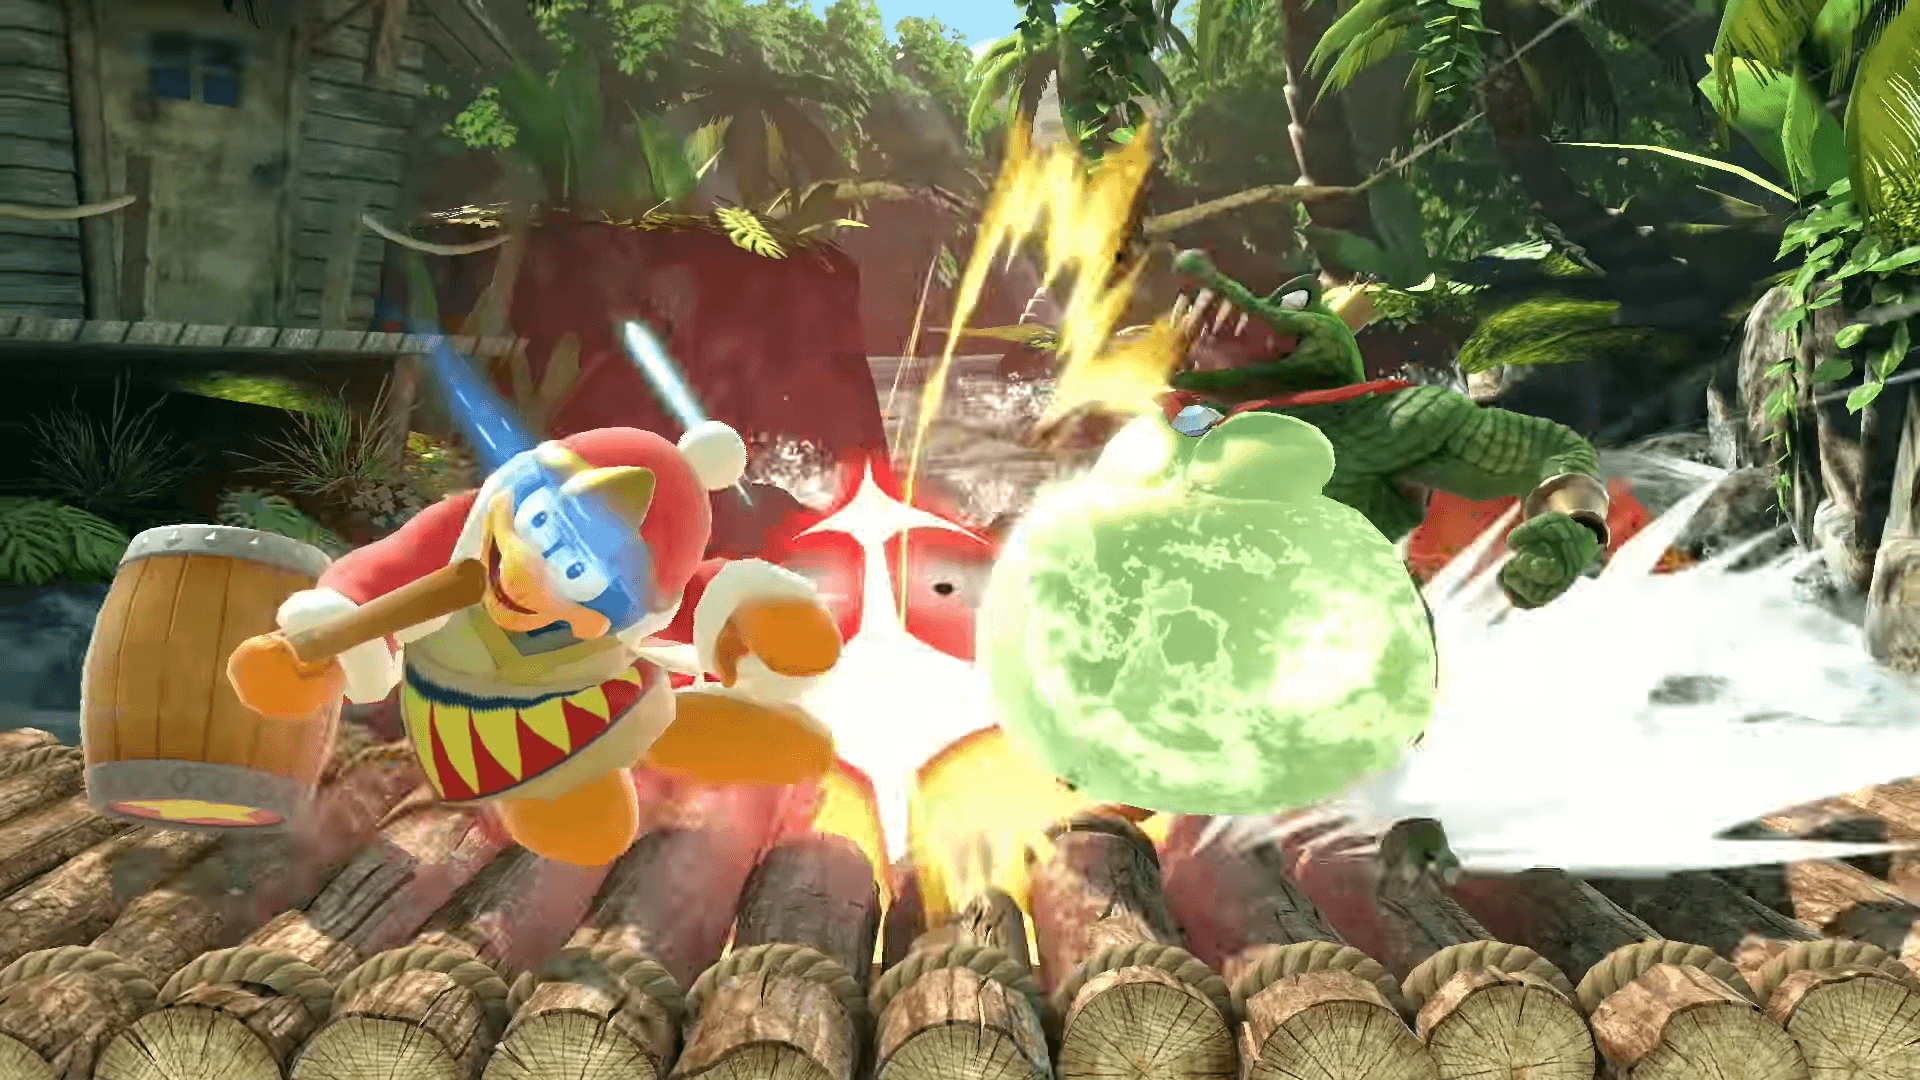 King K. Rool's belly shield attack Part 3. Super Smash Brothers